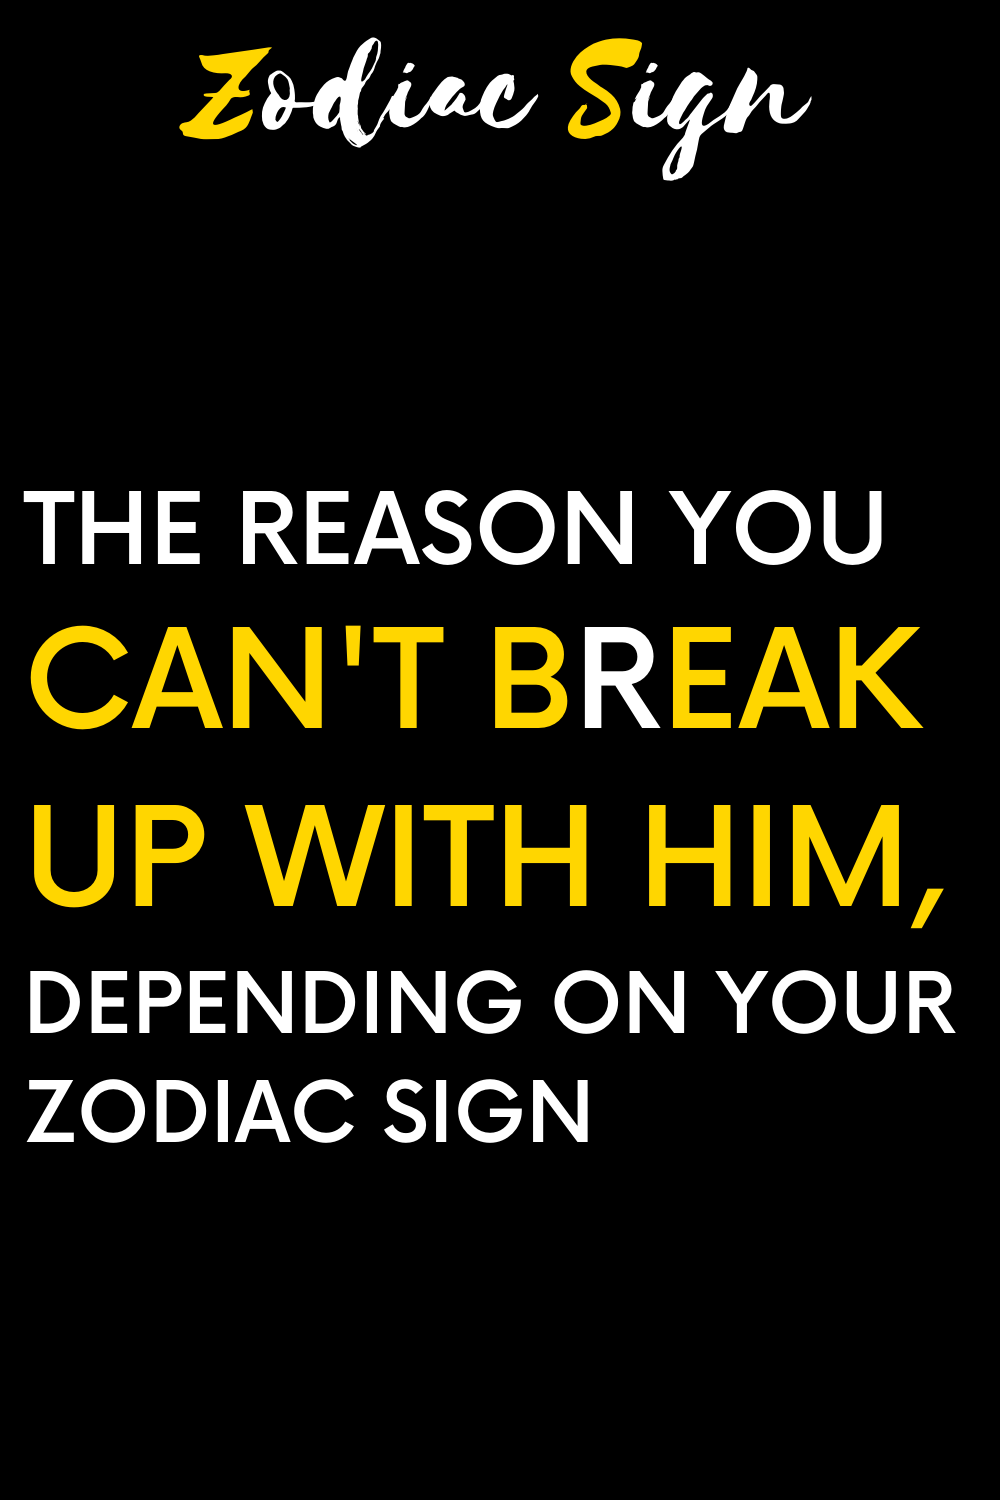 The reason you can't break up with him, depending on your zodiac sign